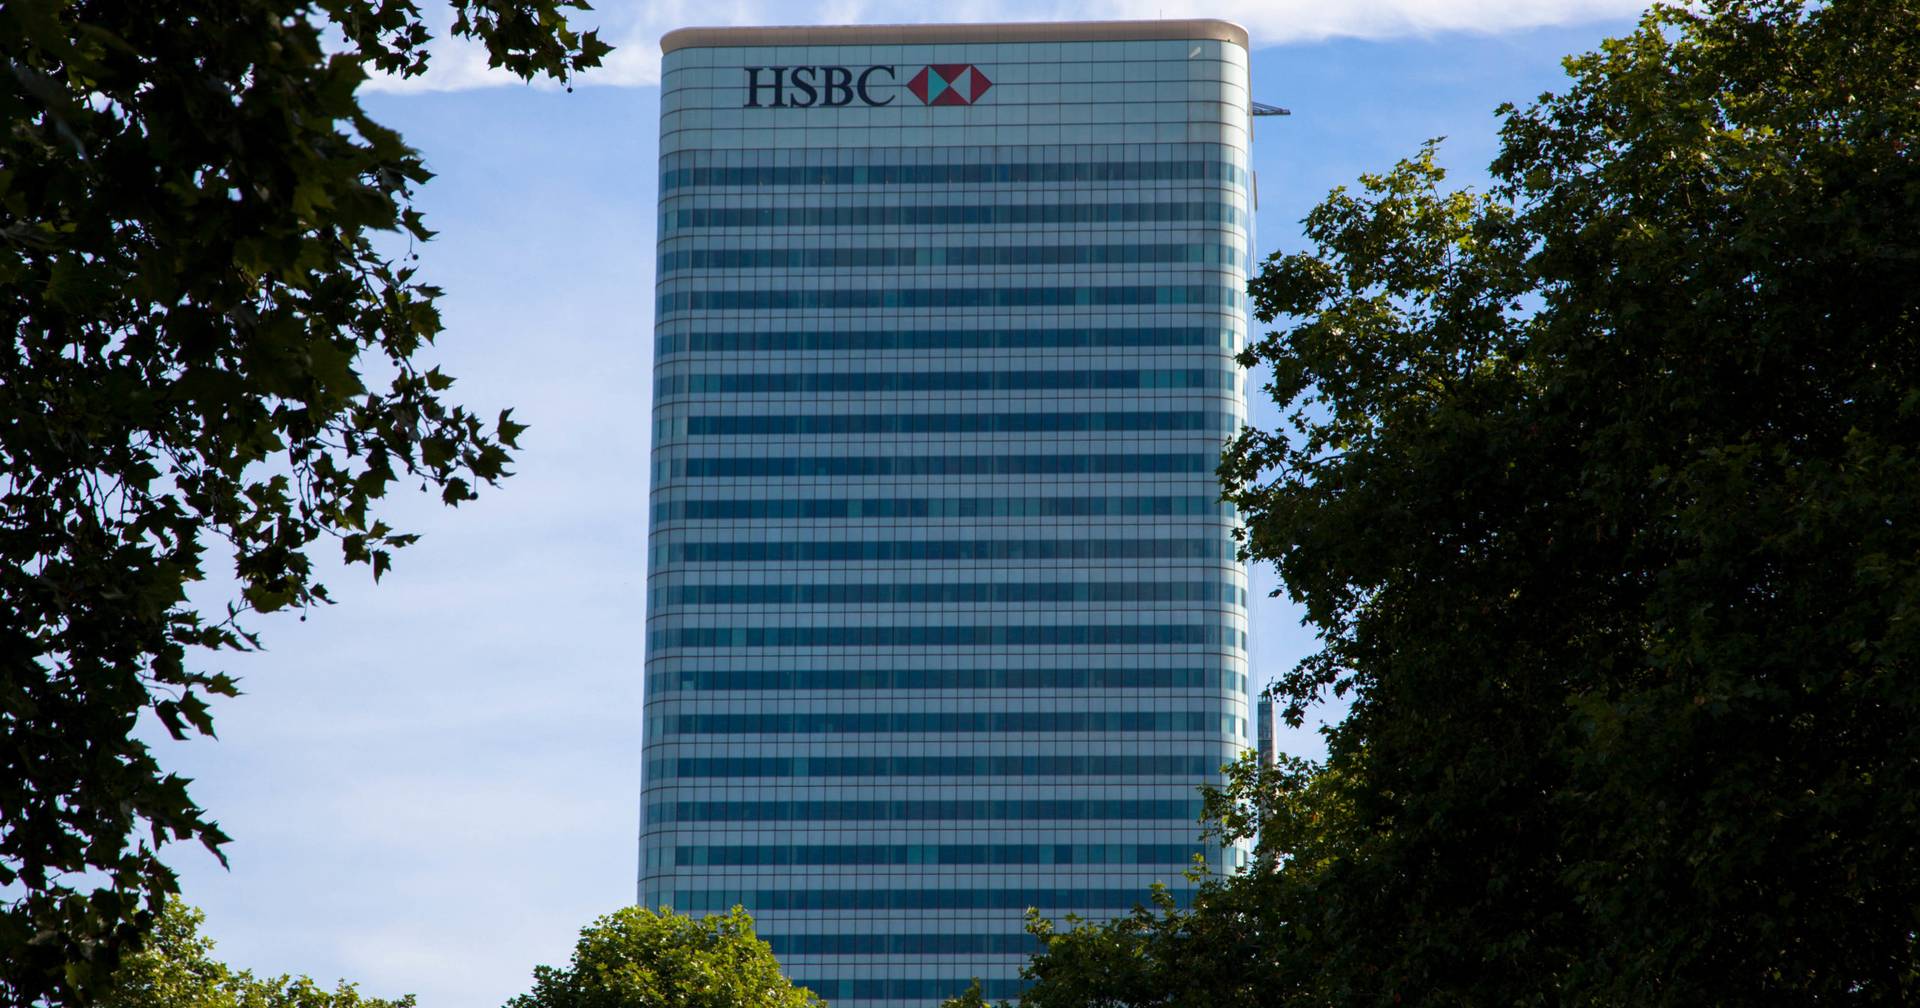 HSBC’s profit more than tripled in the first quarter